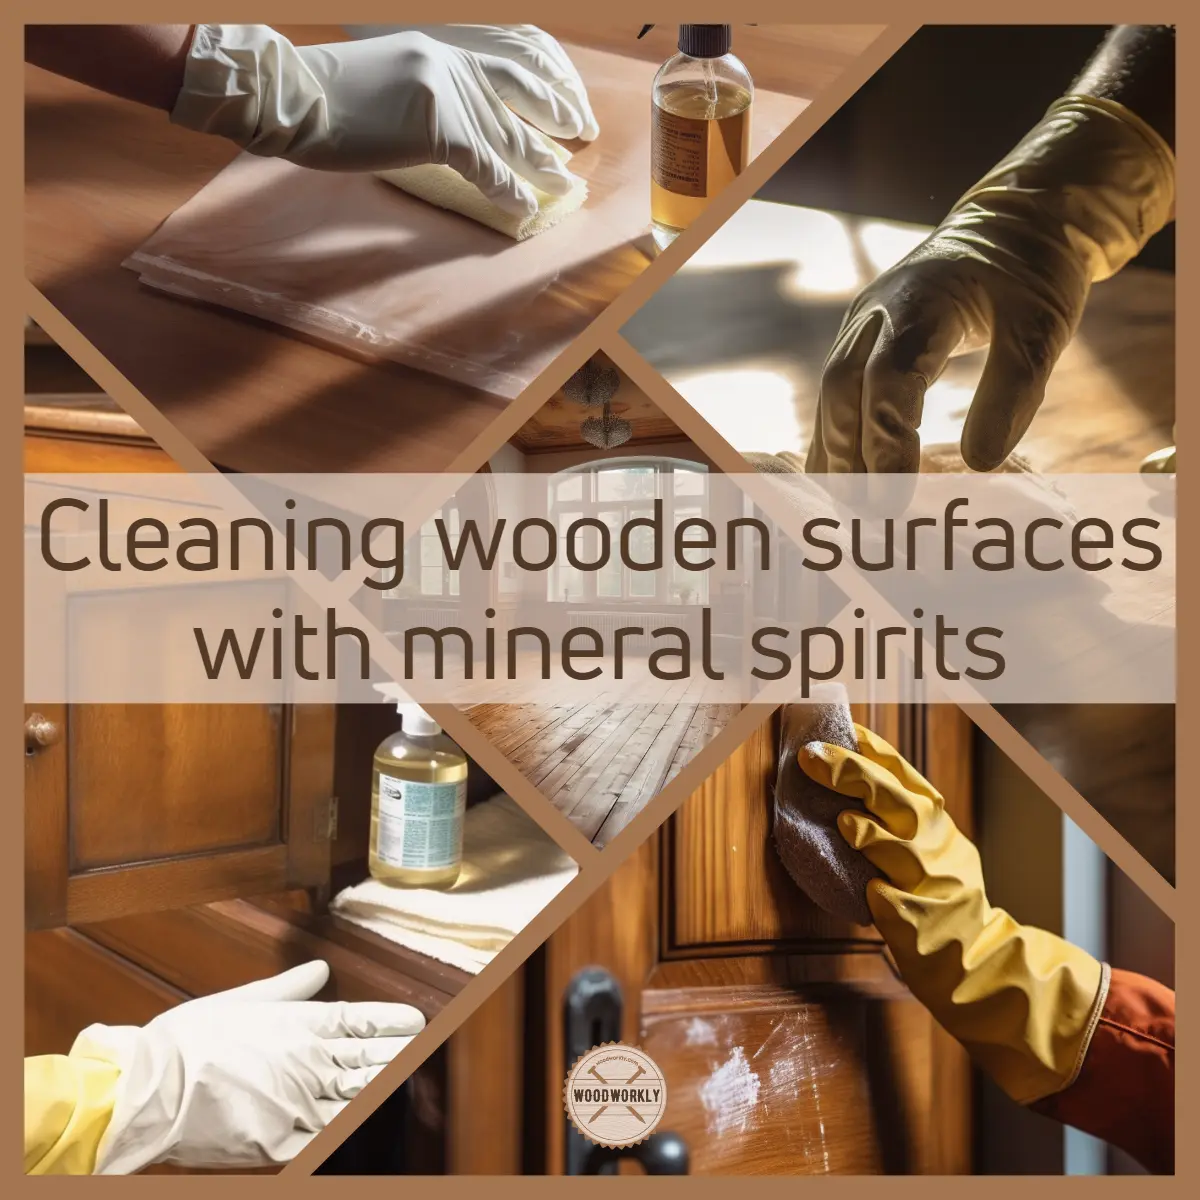 Cleaning wooden surfaces with mineral spirits